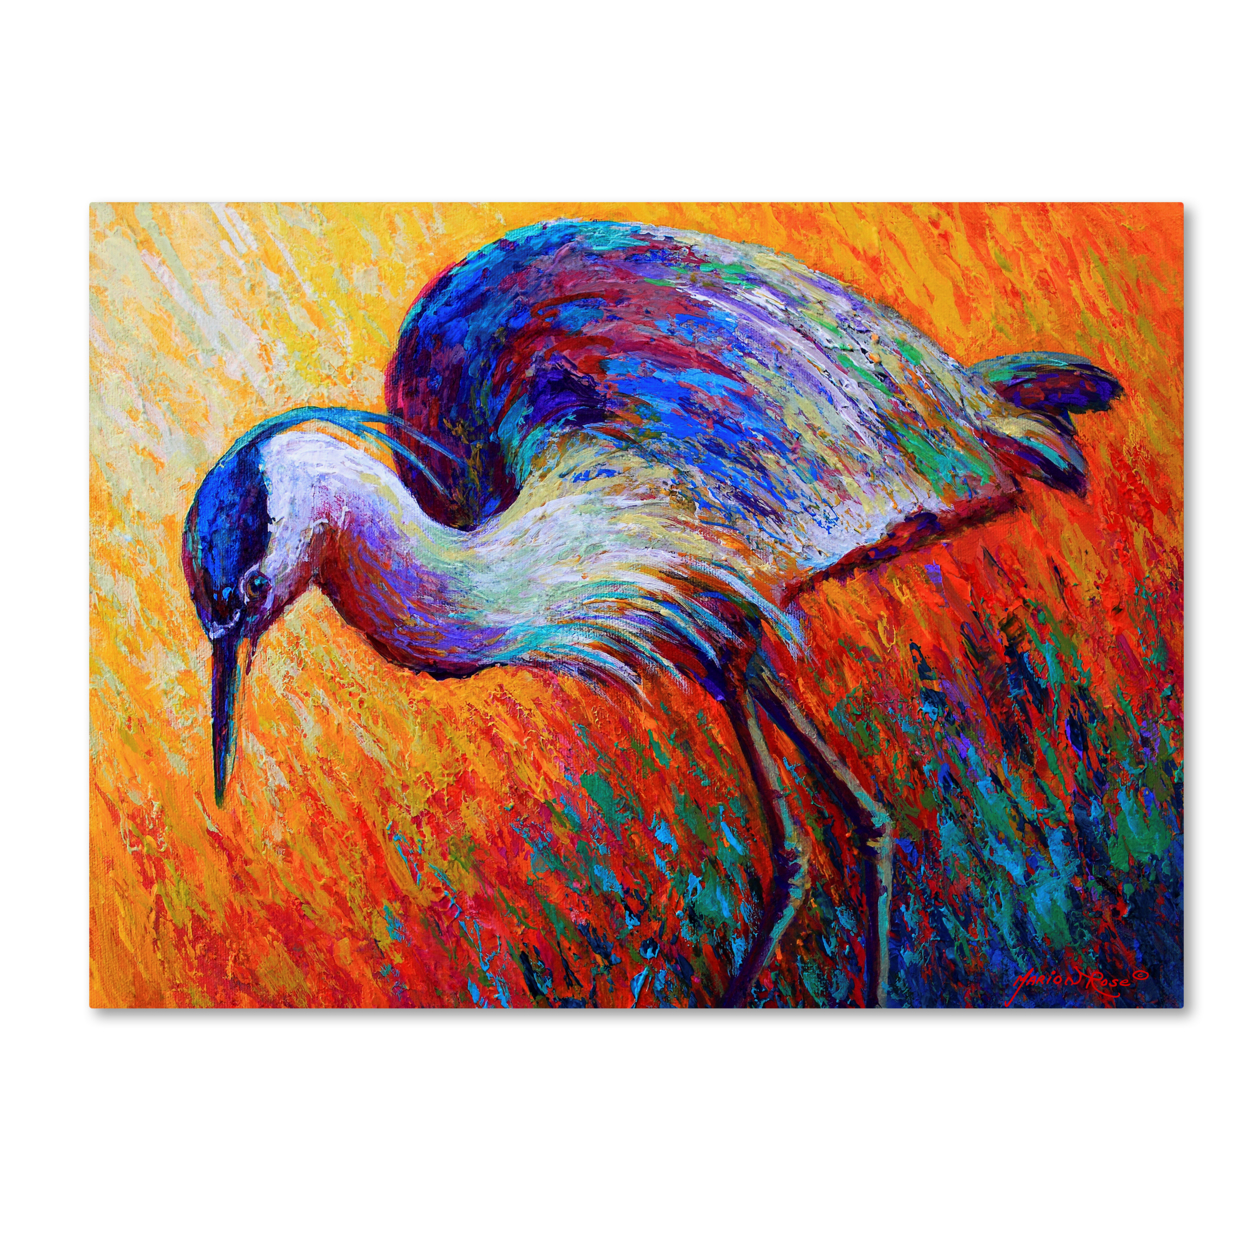 Marion Rose 'Bird Of Dreams' Ready To Hang Canvas Art 24 X 32 Inches Made In USA